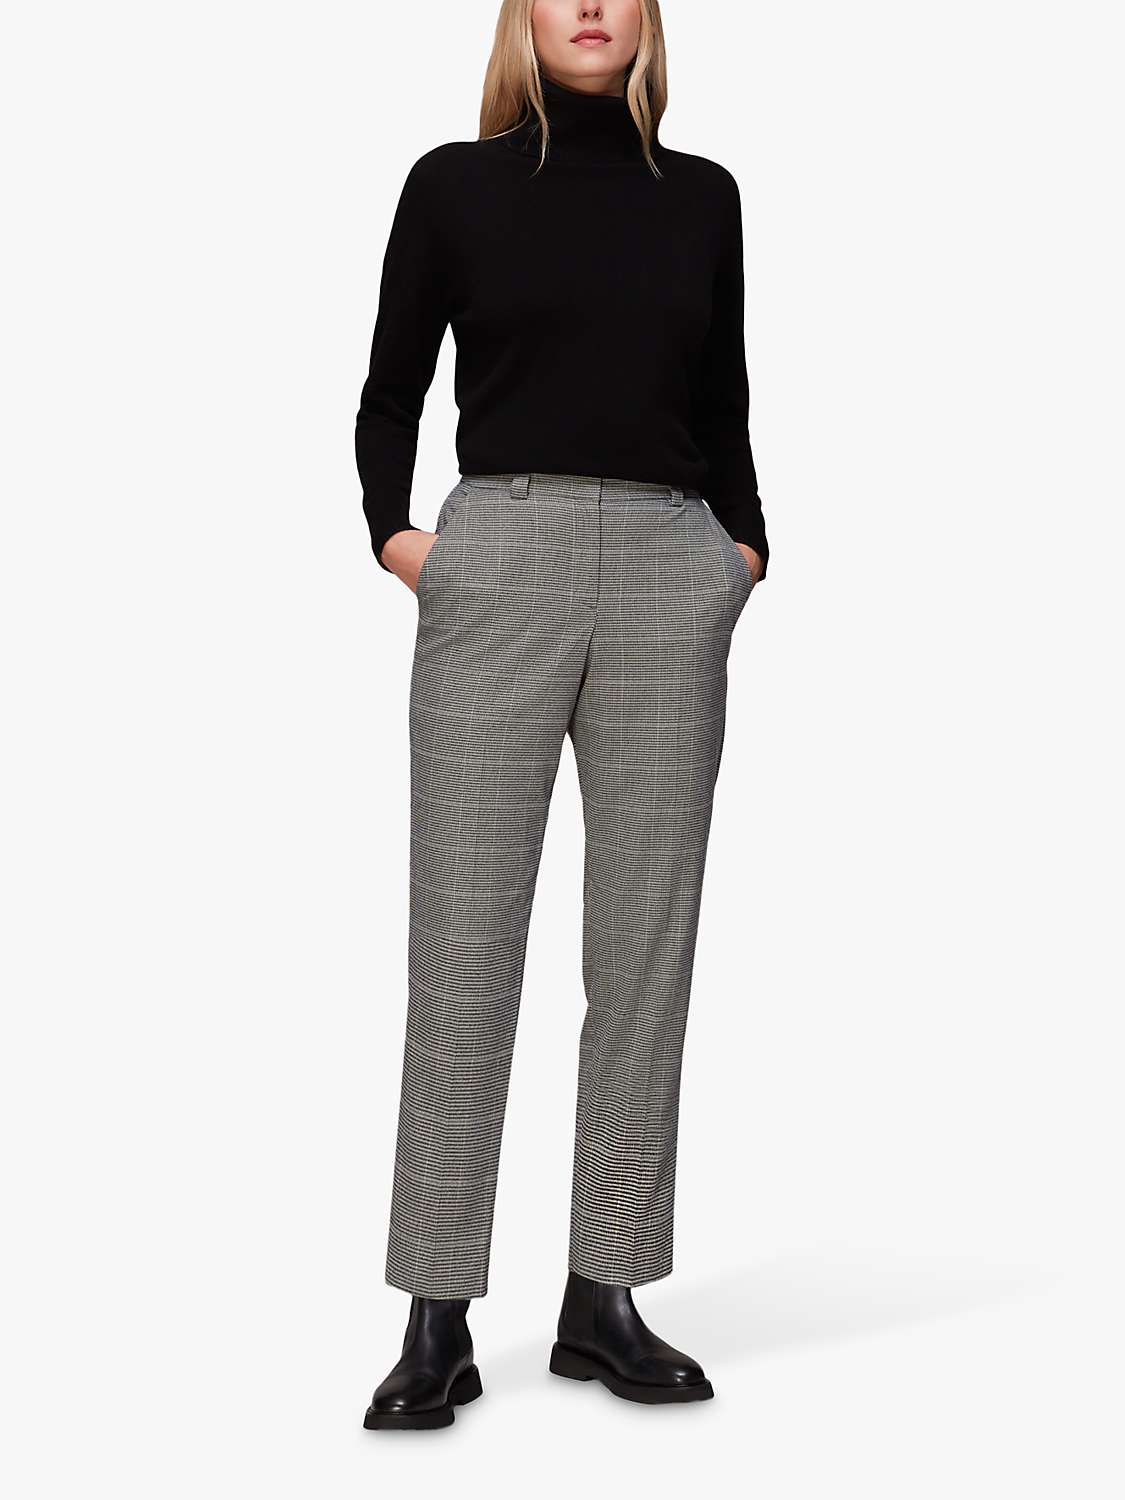 Buy Whistles Lucie Checked Cigarette Trousers, Brown Online at johnlewis.com